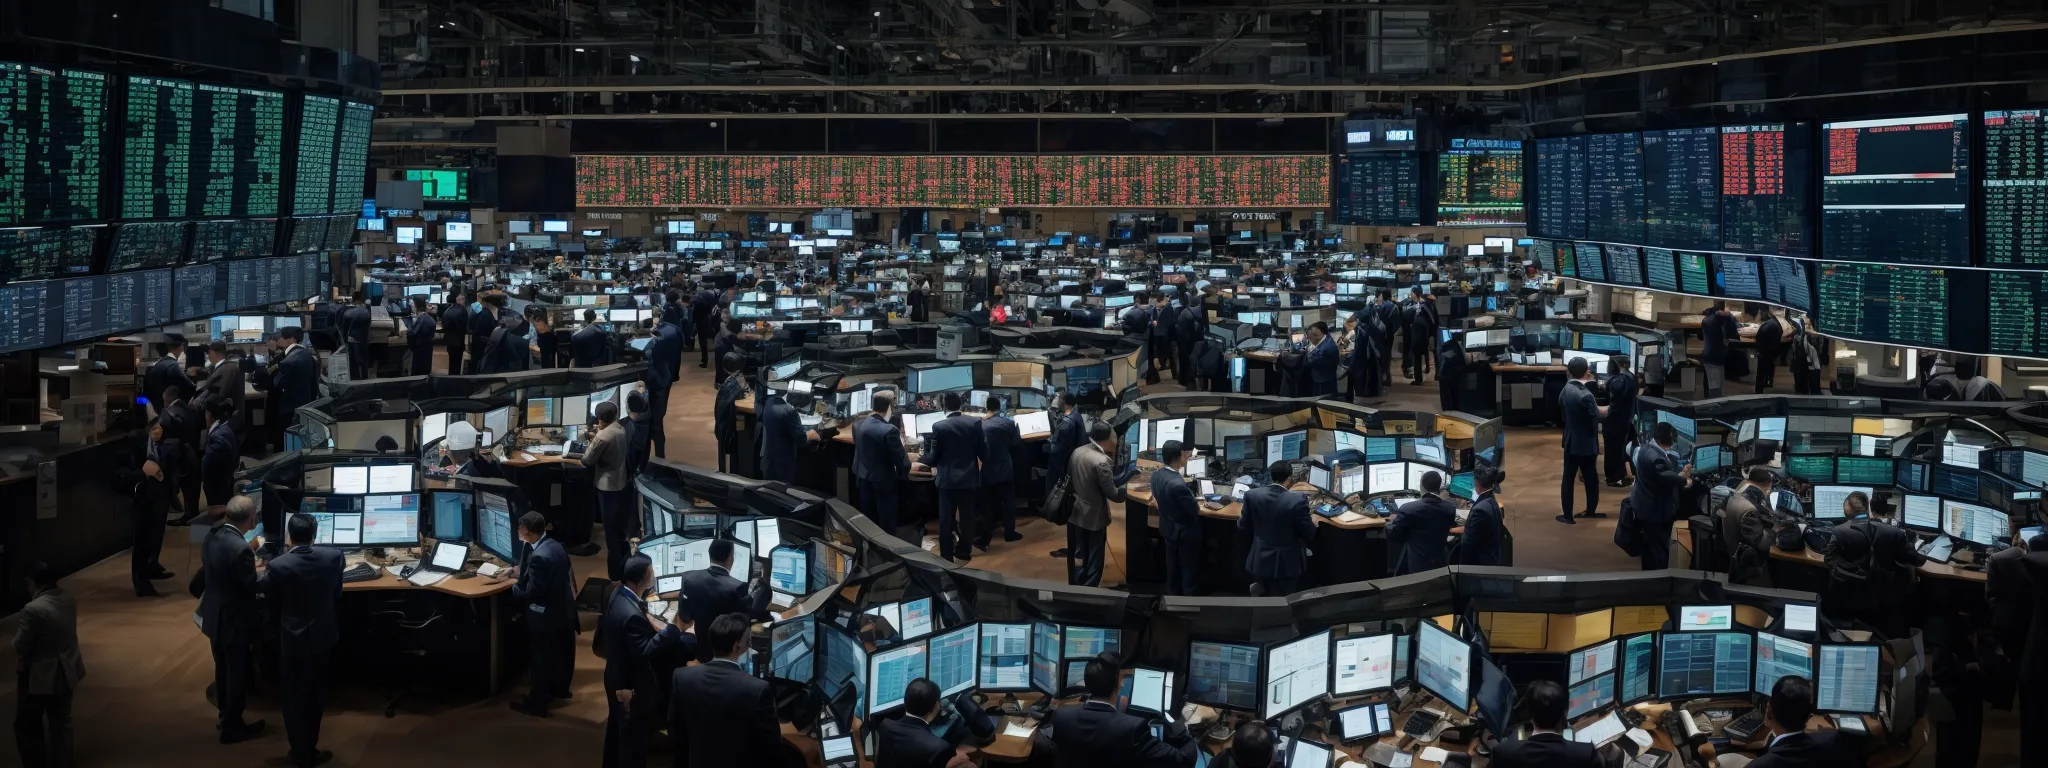 a bustling stock market floor with traders intently monitoring screens, symbolizing strategic competition in a dynamic environment.